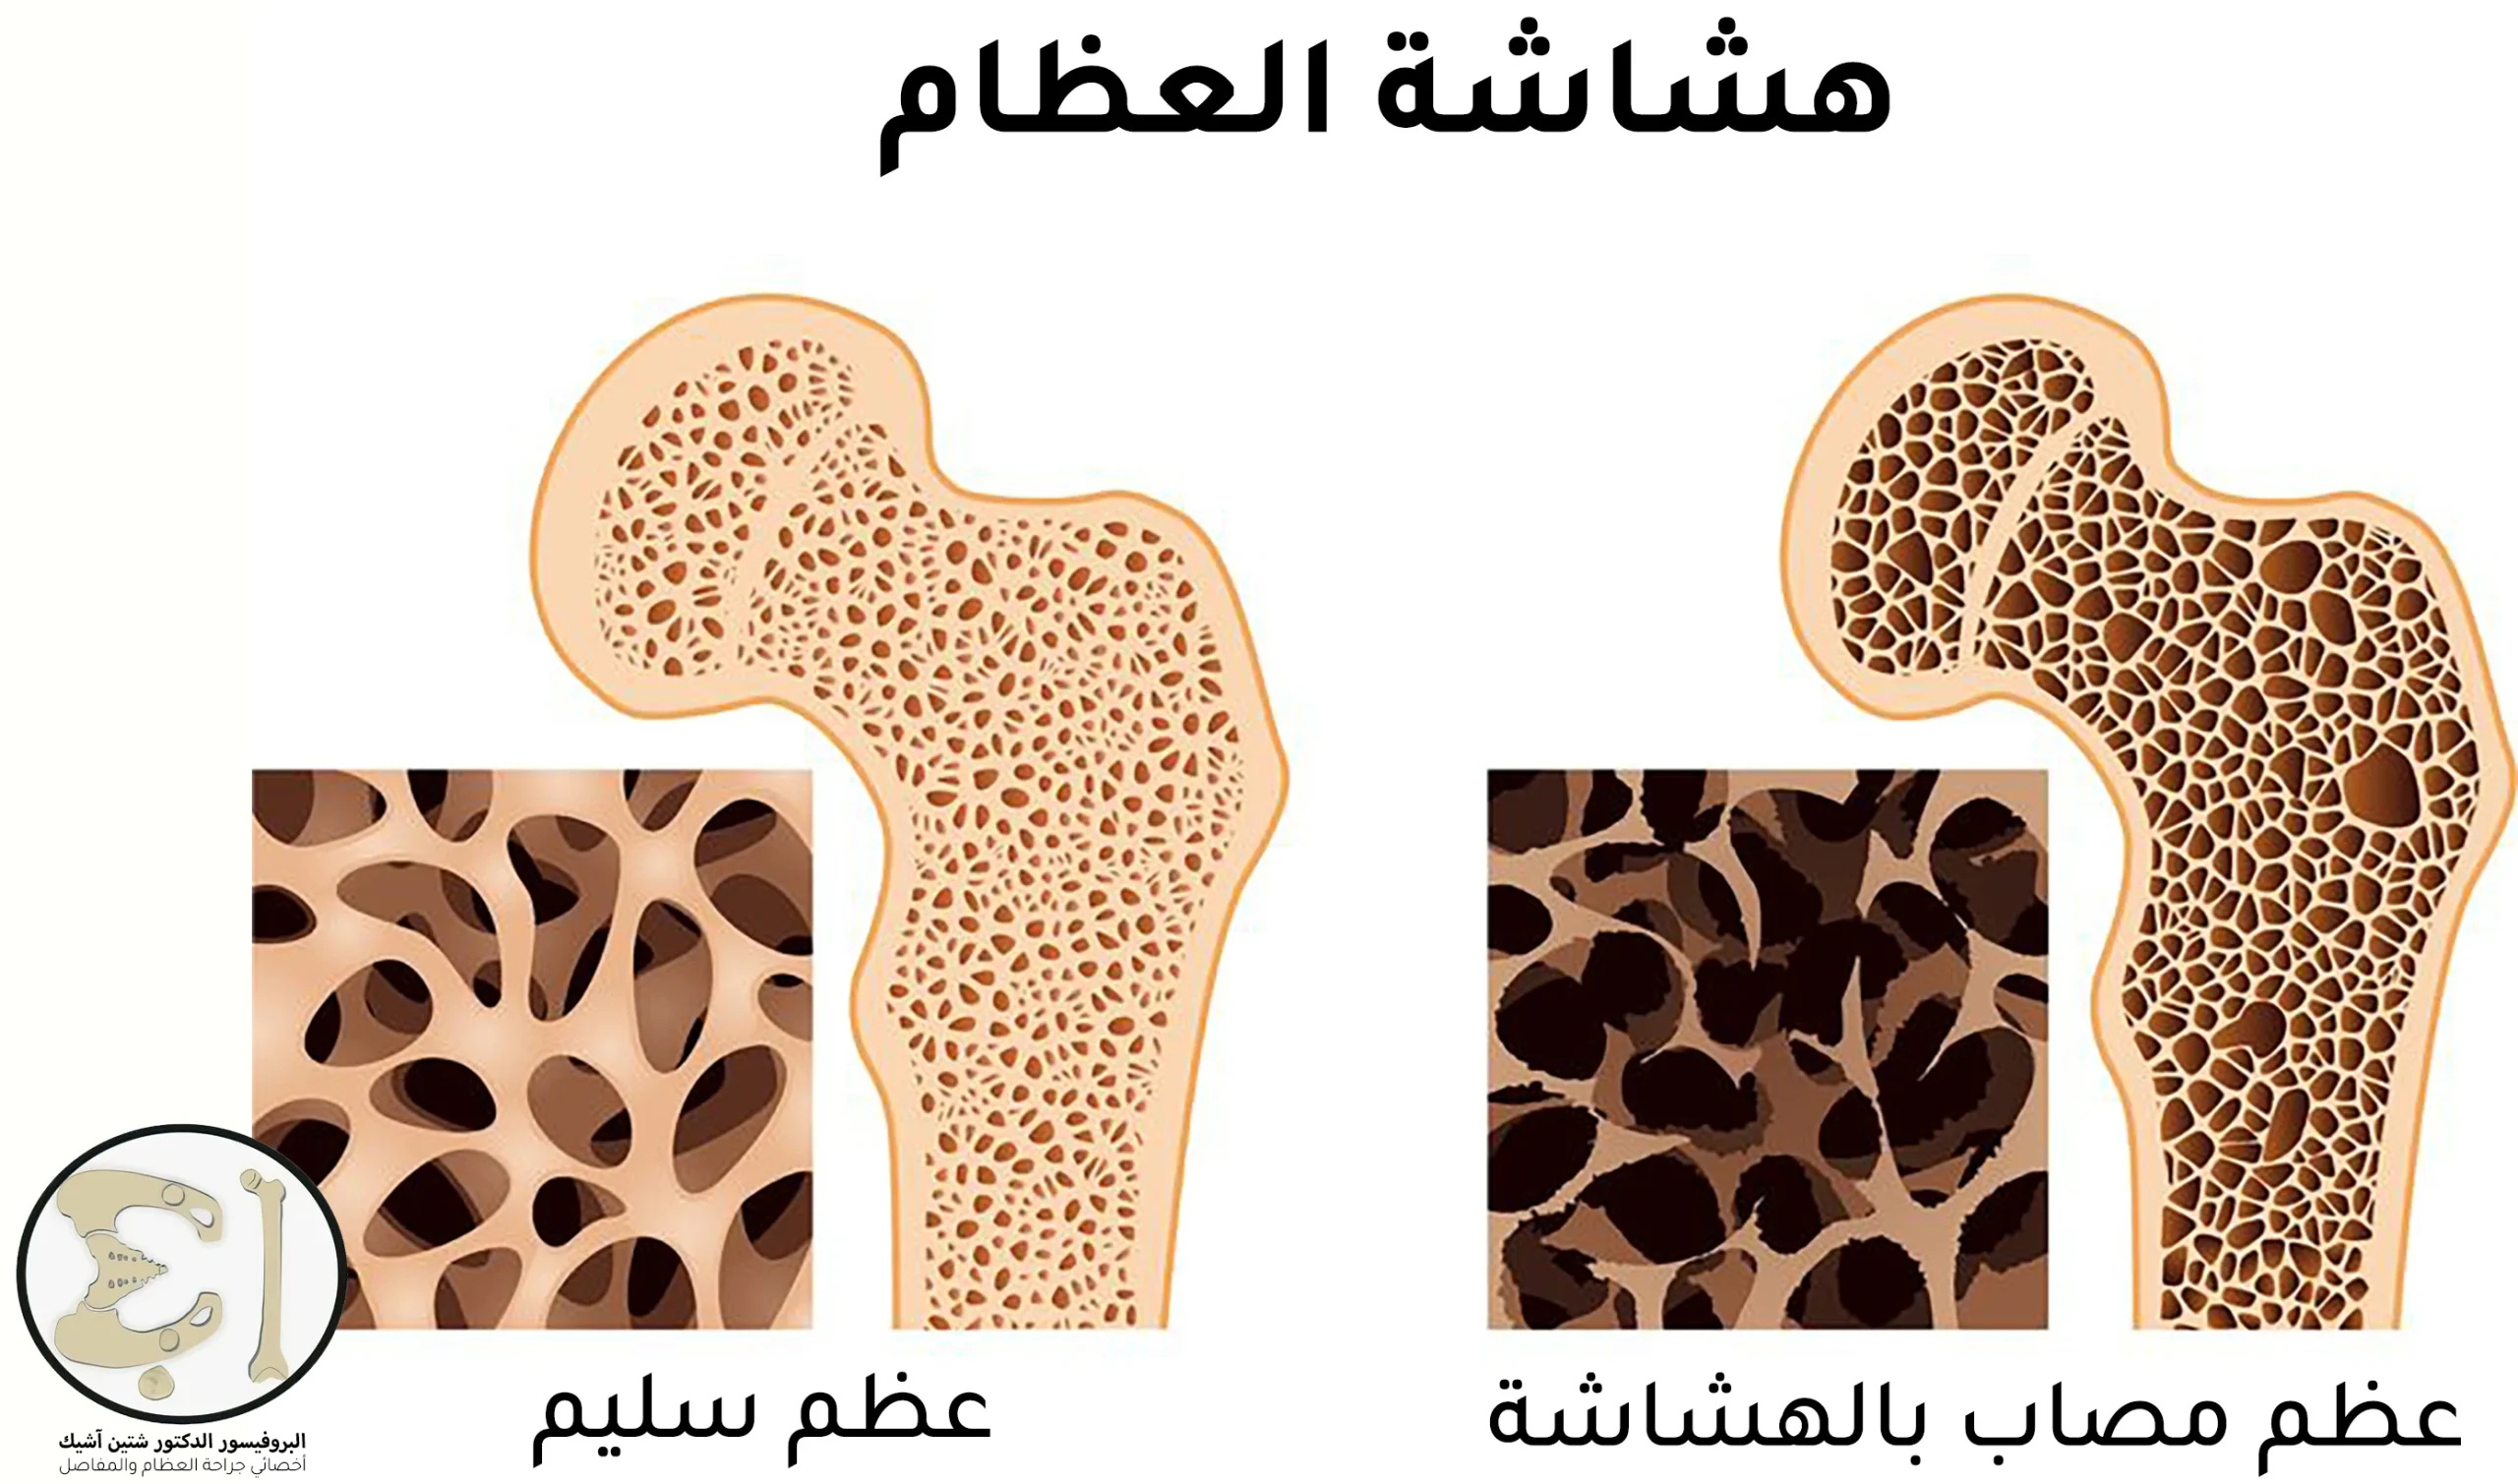 An image showing the difference between normal bone and bone with osteoporosis